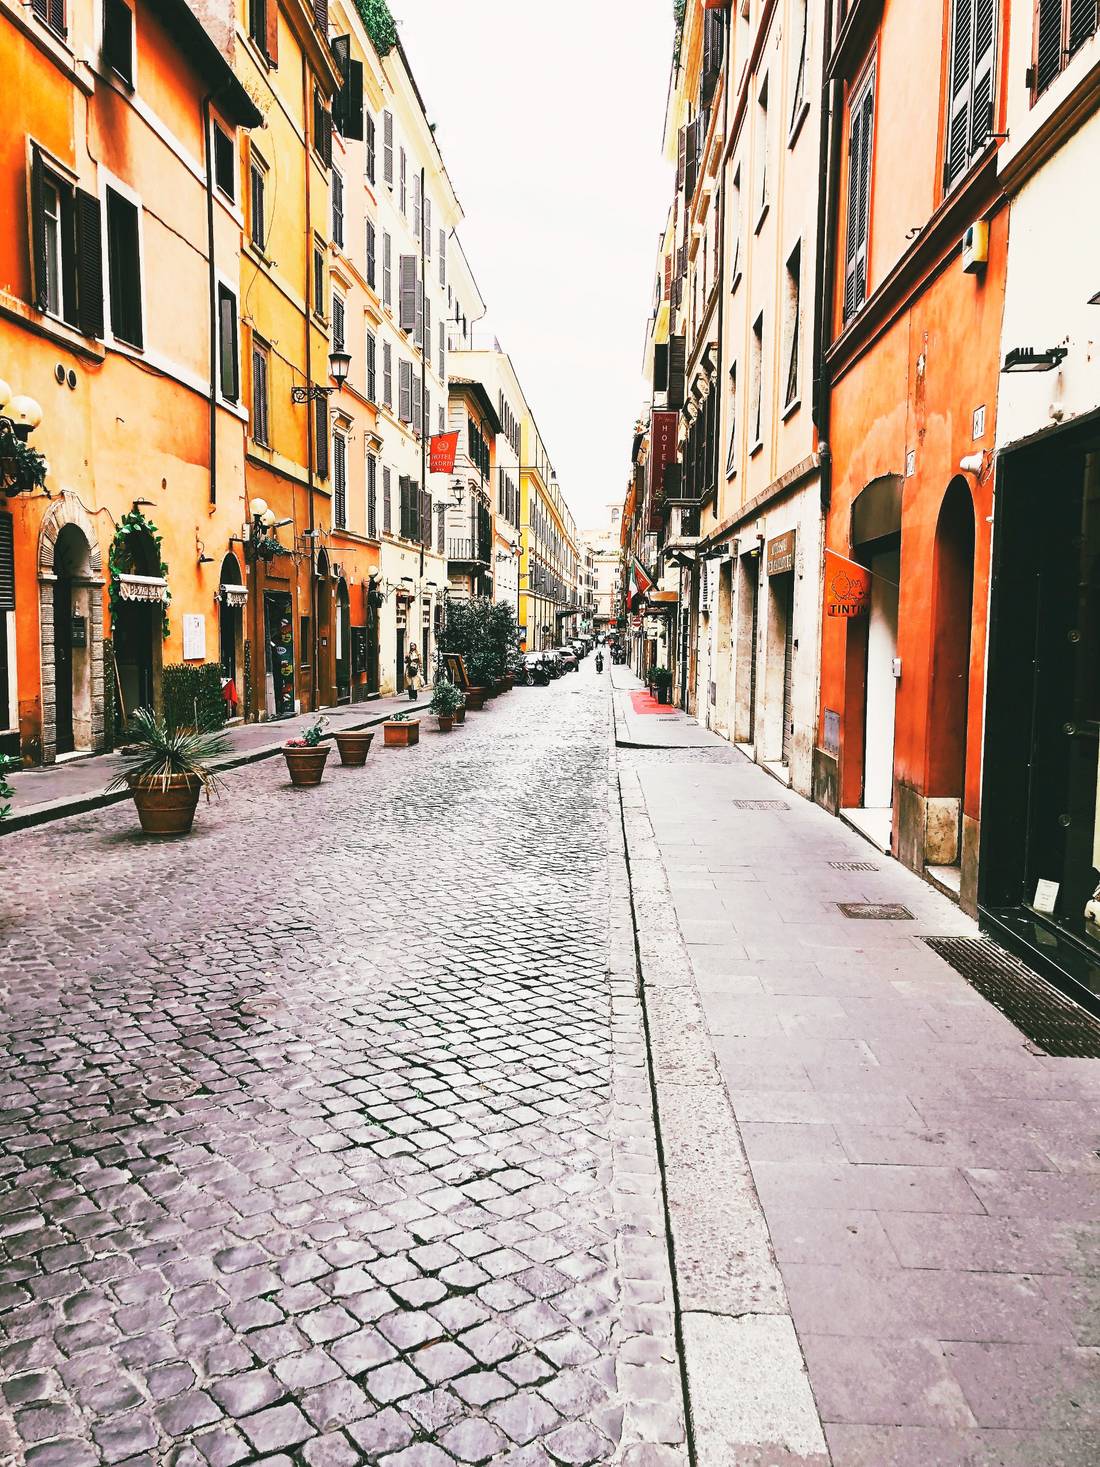 One of many streets in Rome, Italy